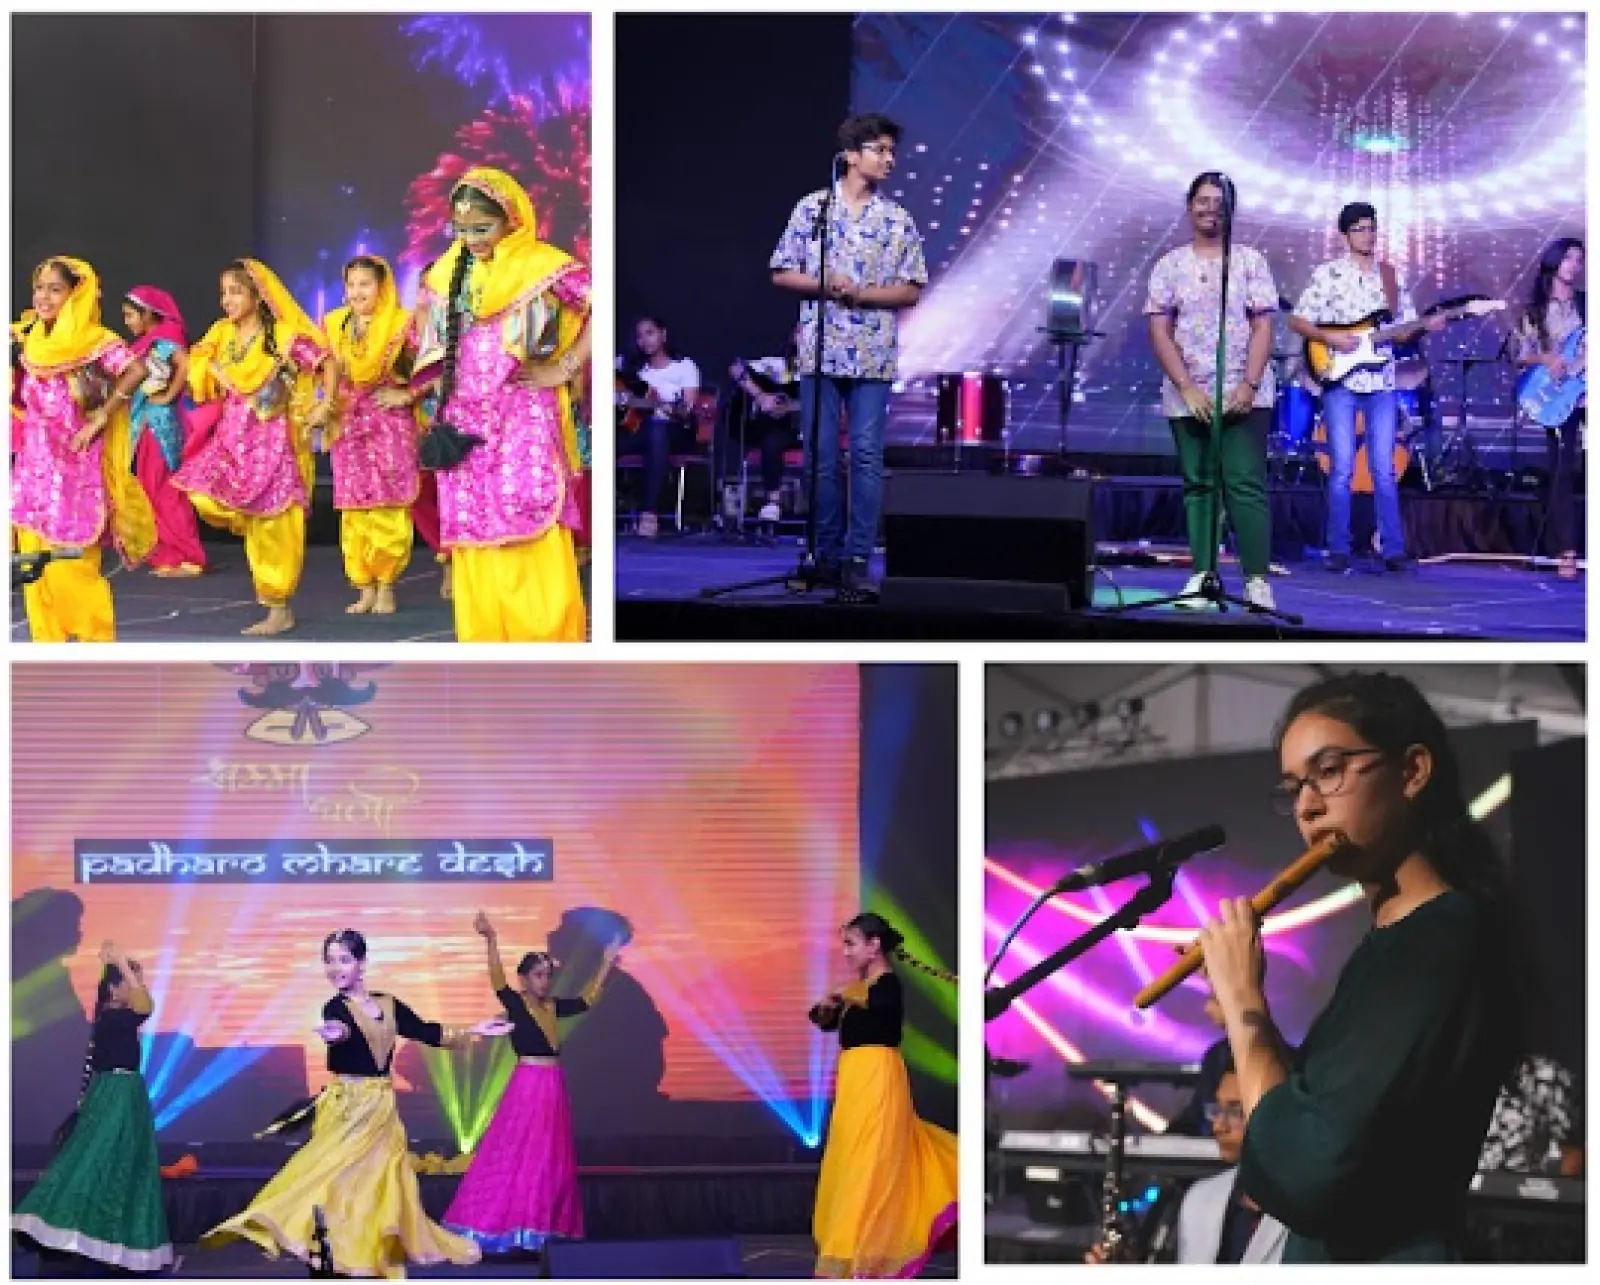 It was a 'Celebration of Learning' at Manthan's Annual School Day Event